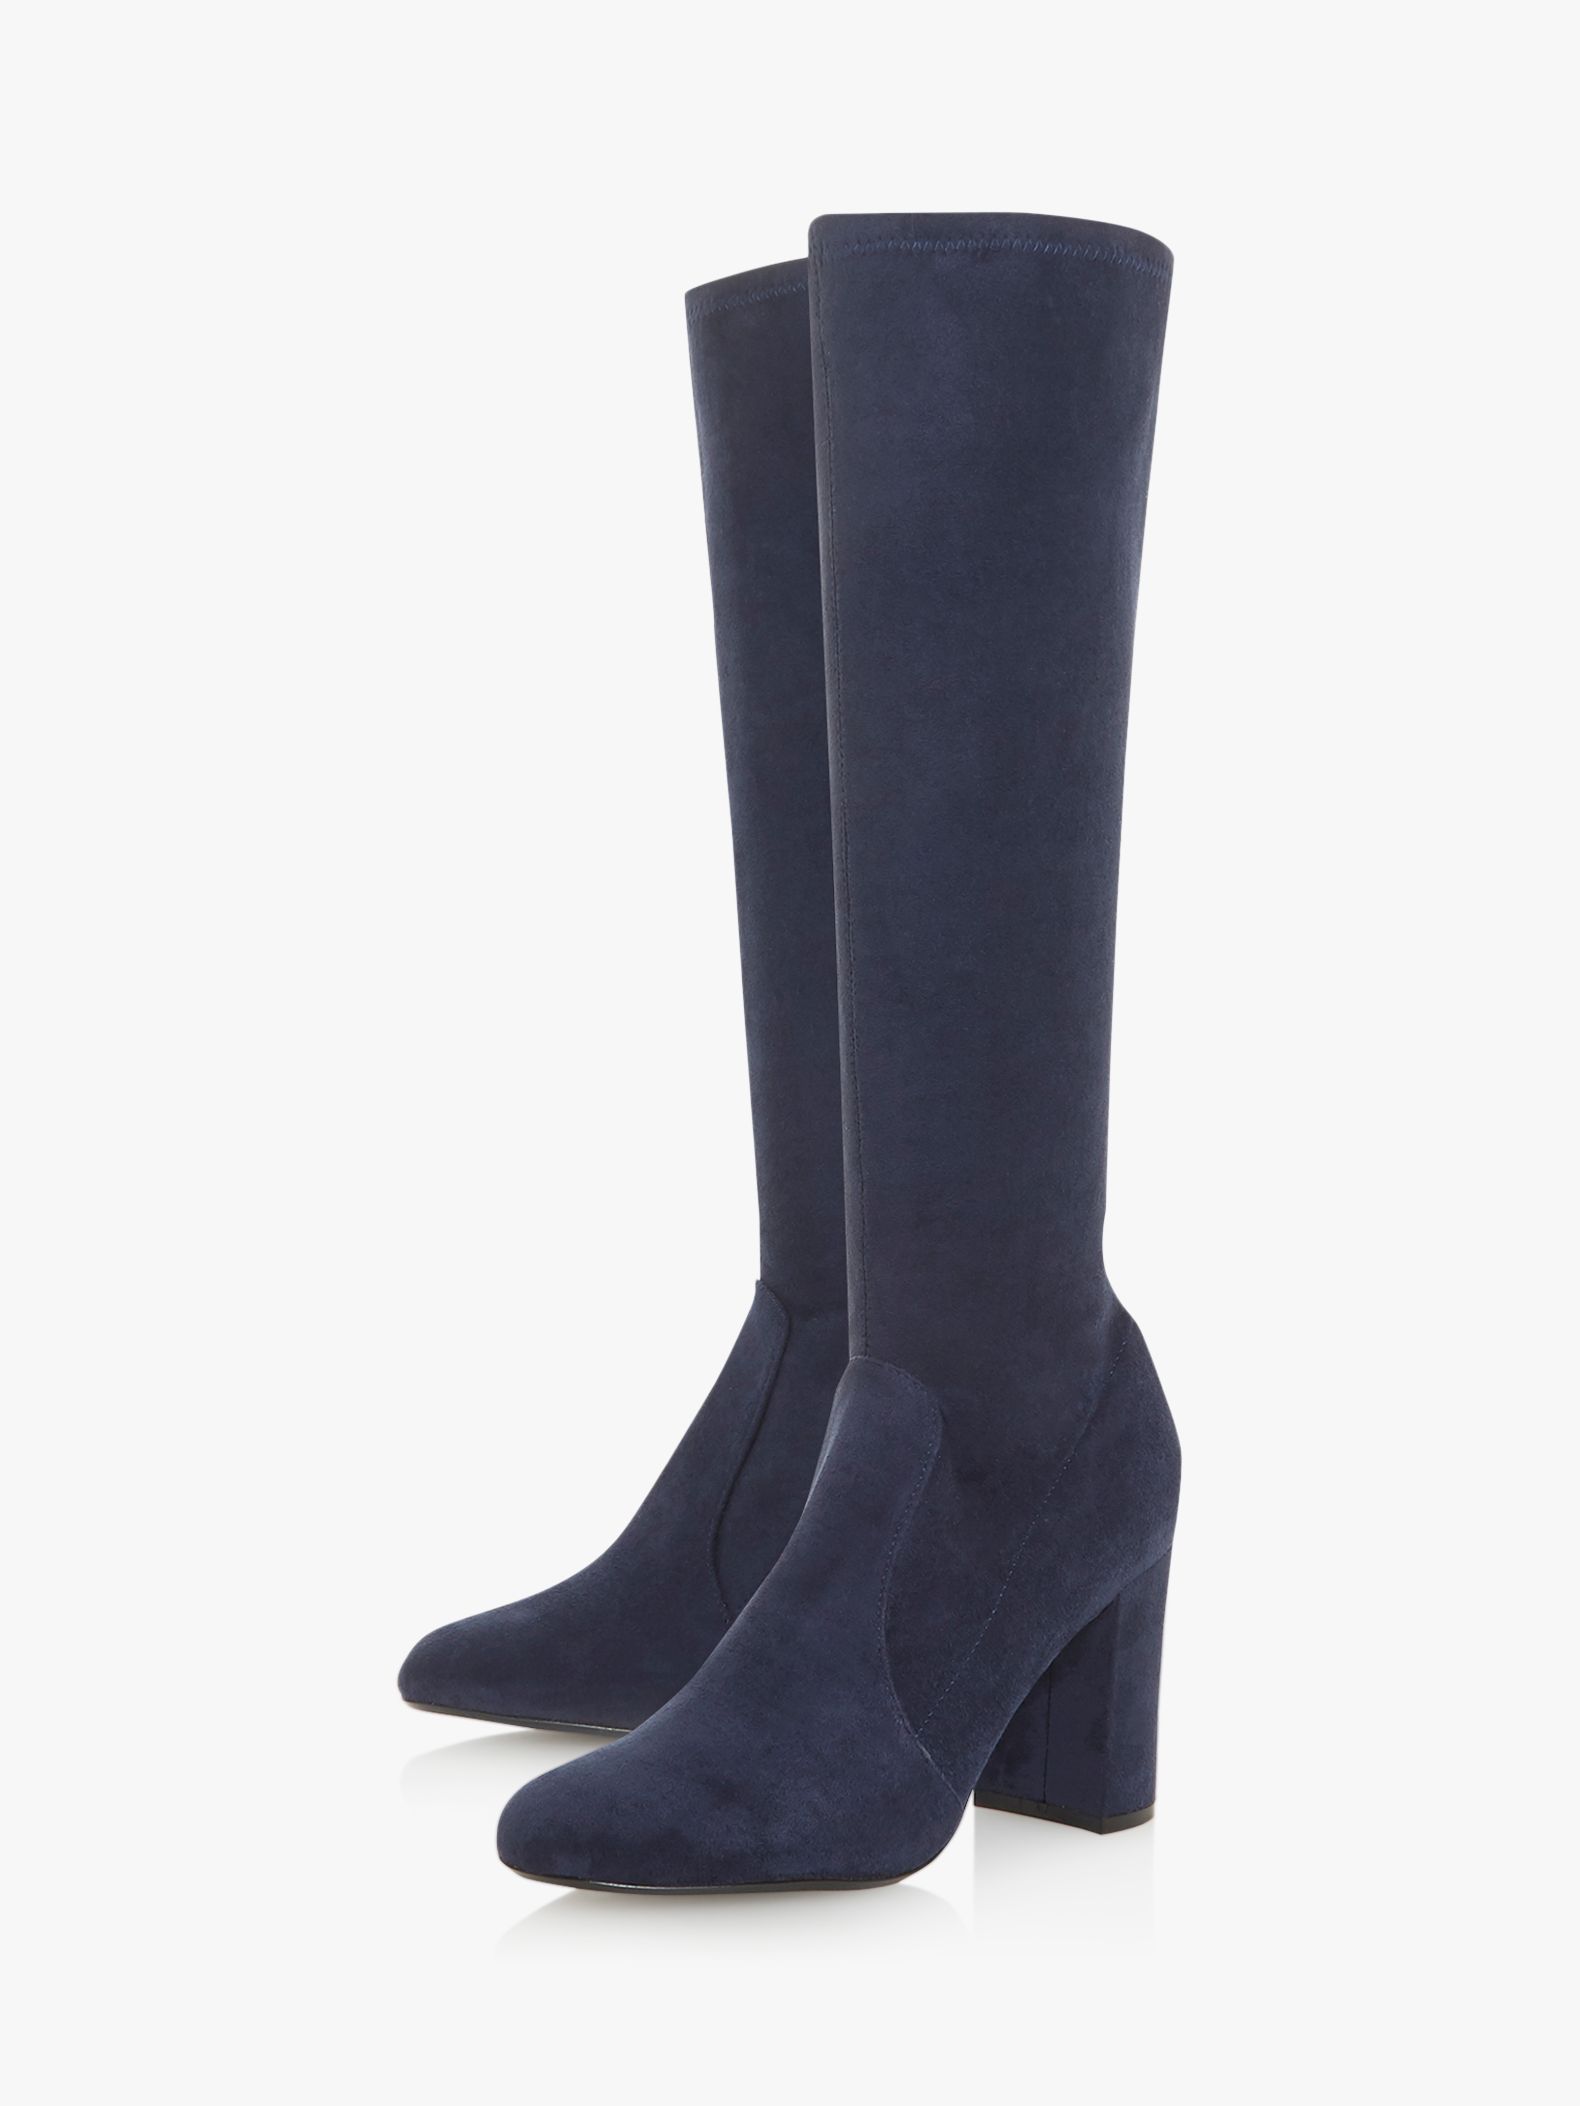 navy knee high boots leather